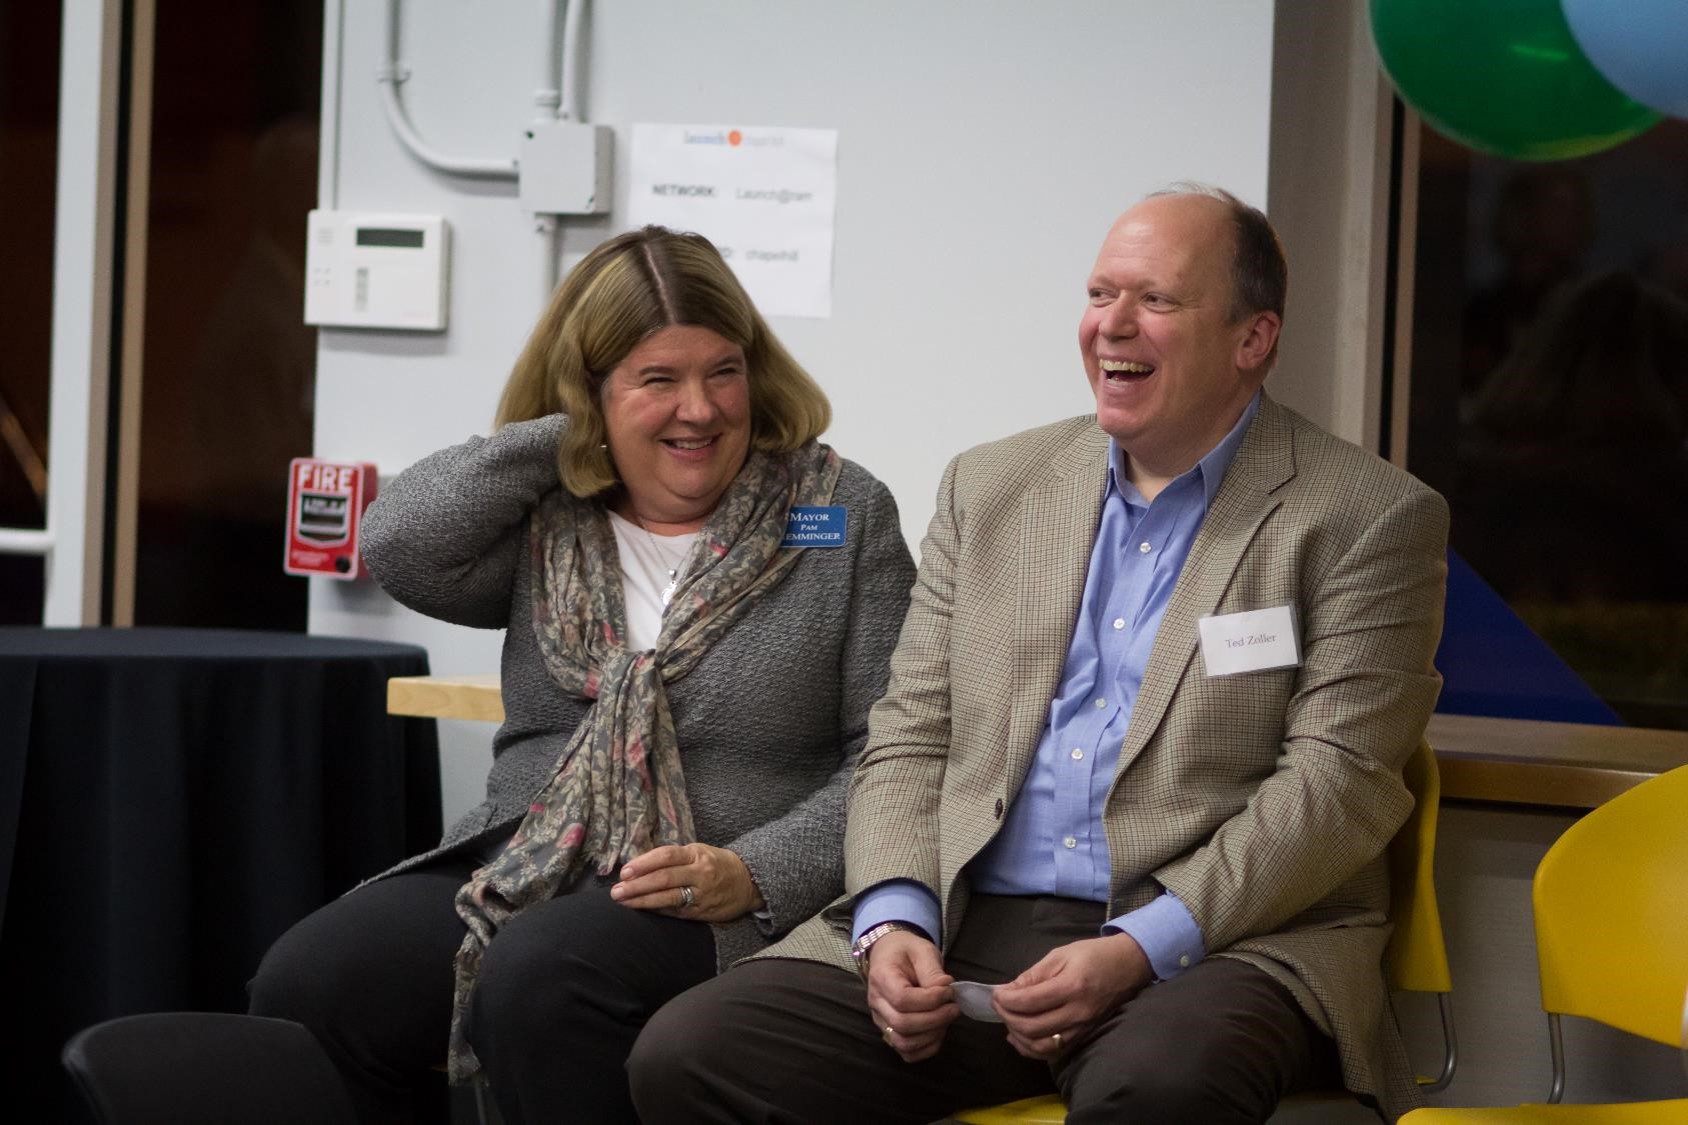 Pam Hemminger, mayor of Chapel Hill, and Ted Zoller, T.W. Lewis Clinical Professor of Strategy and Entrepreneurship and Director of the Center for Entrepreneurial Studies, help lead the celebration.